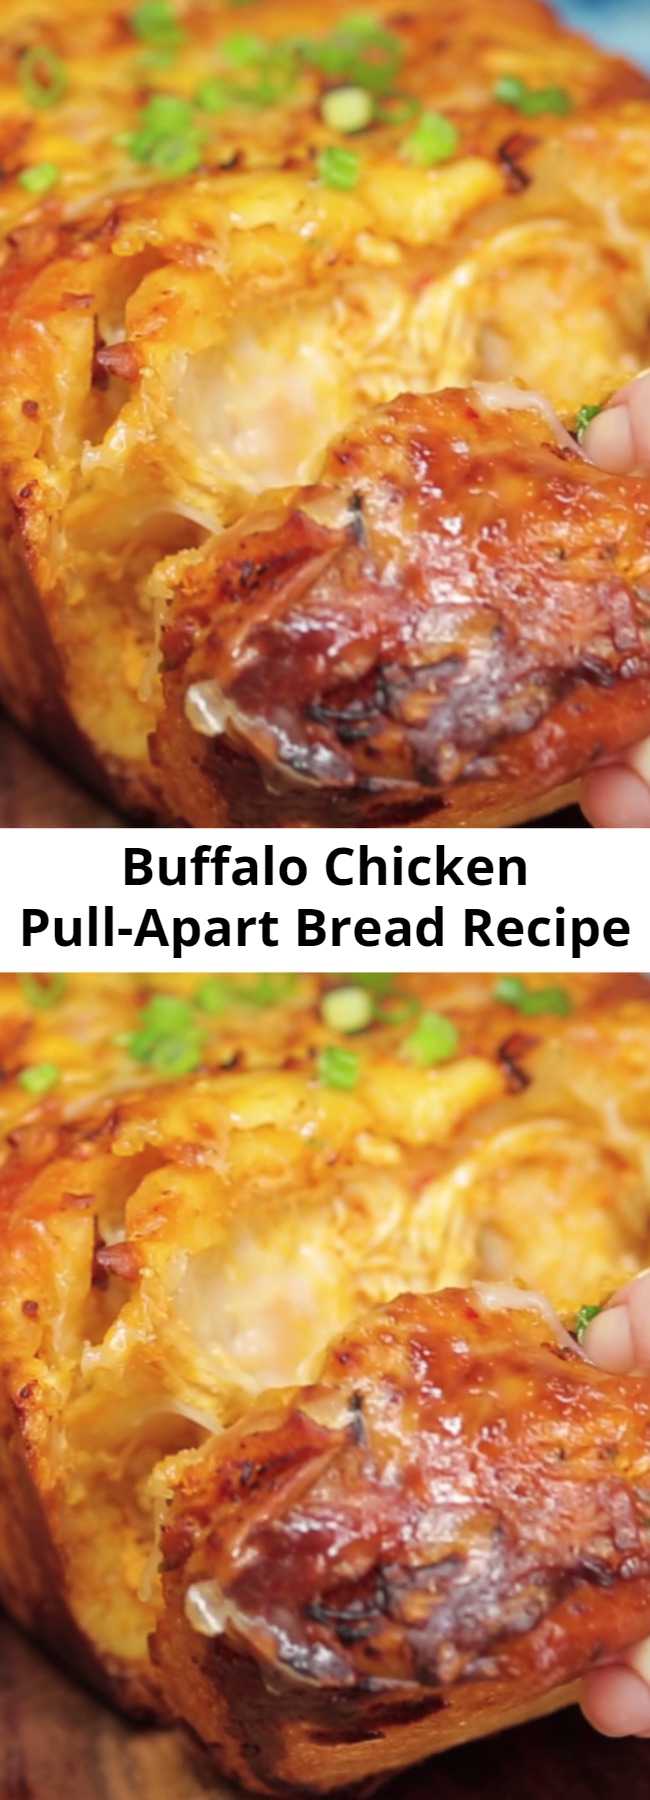 Buffalo Chicken Pull-Apart Bread Recipe - The only way to improve shareable bread is with Buffalo chicken and lots of cheese.